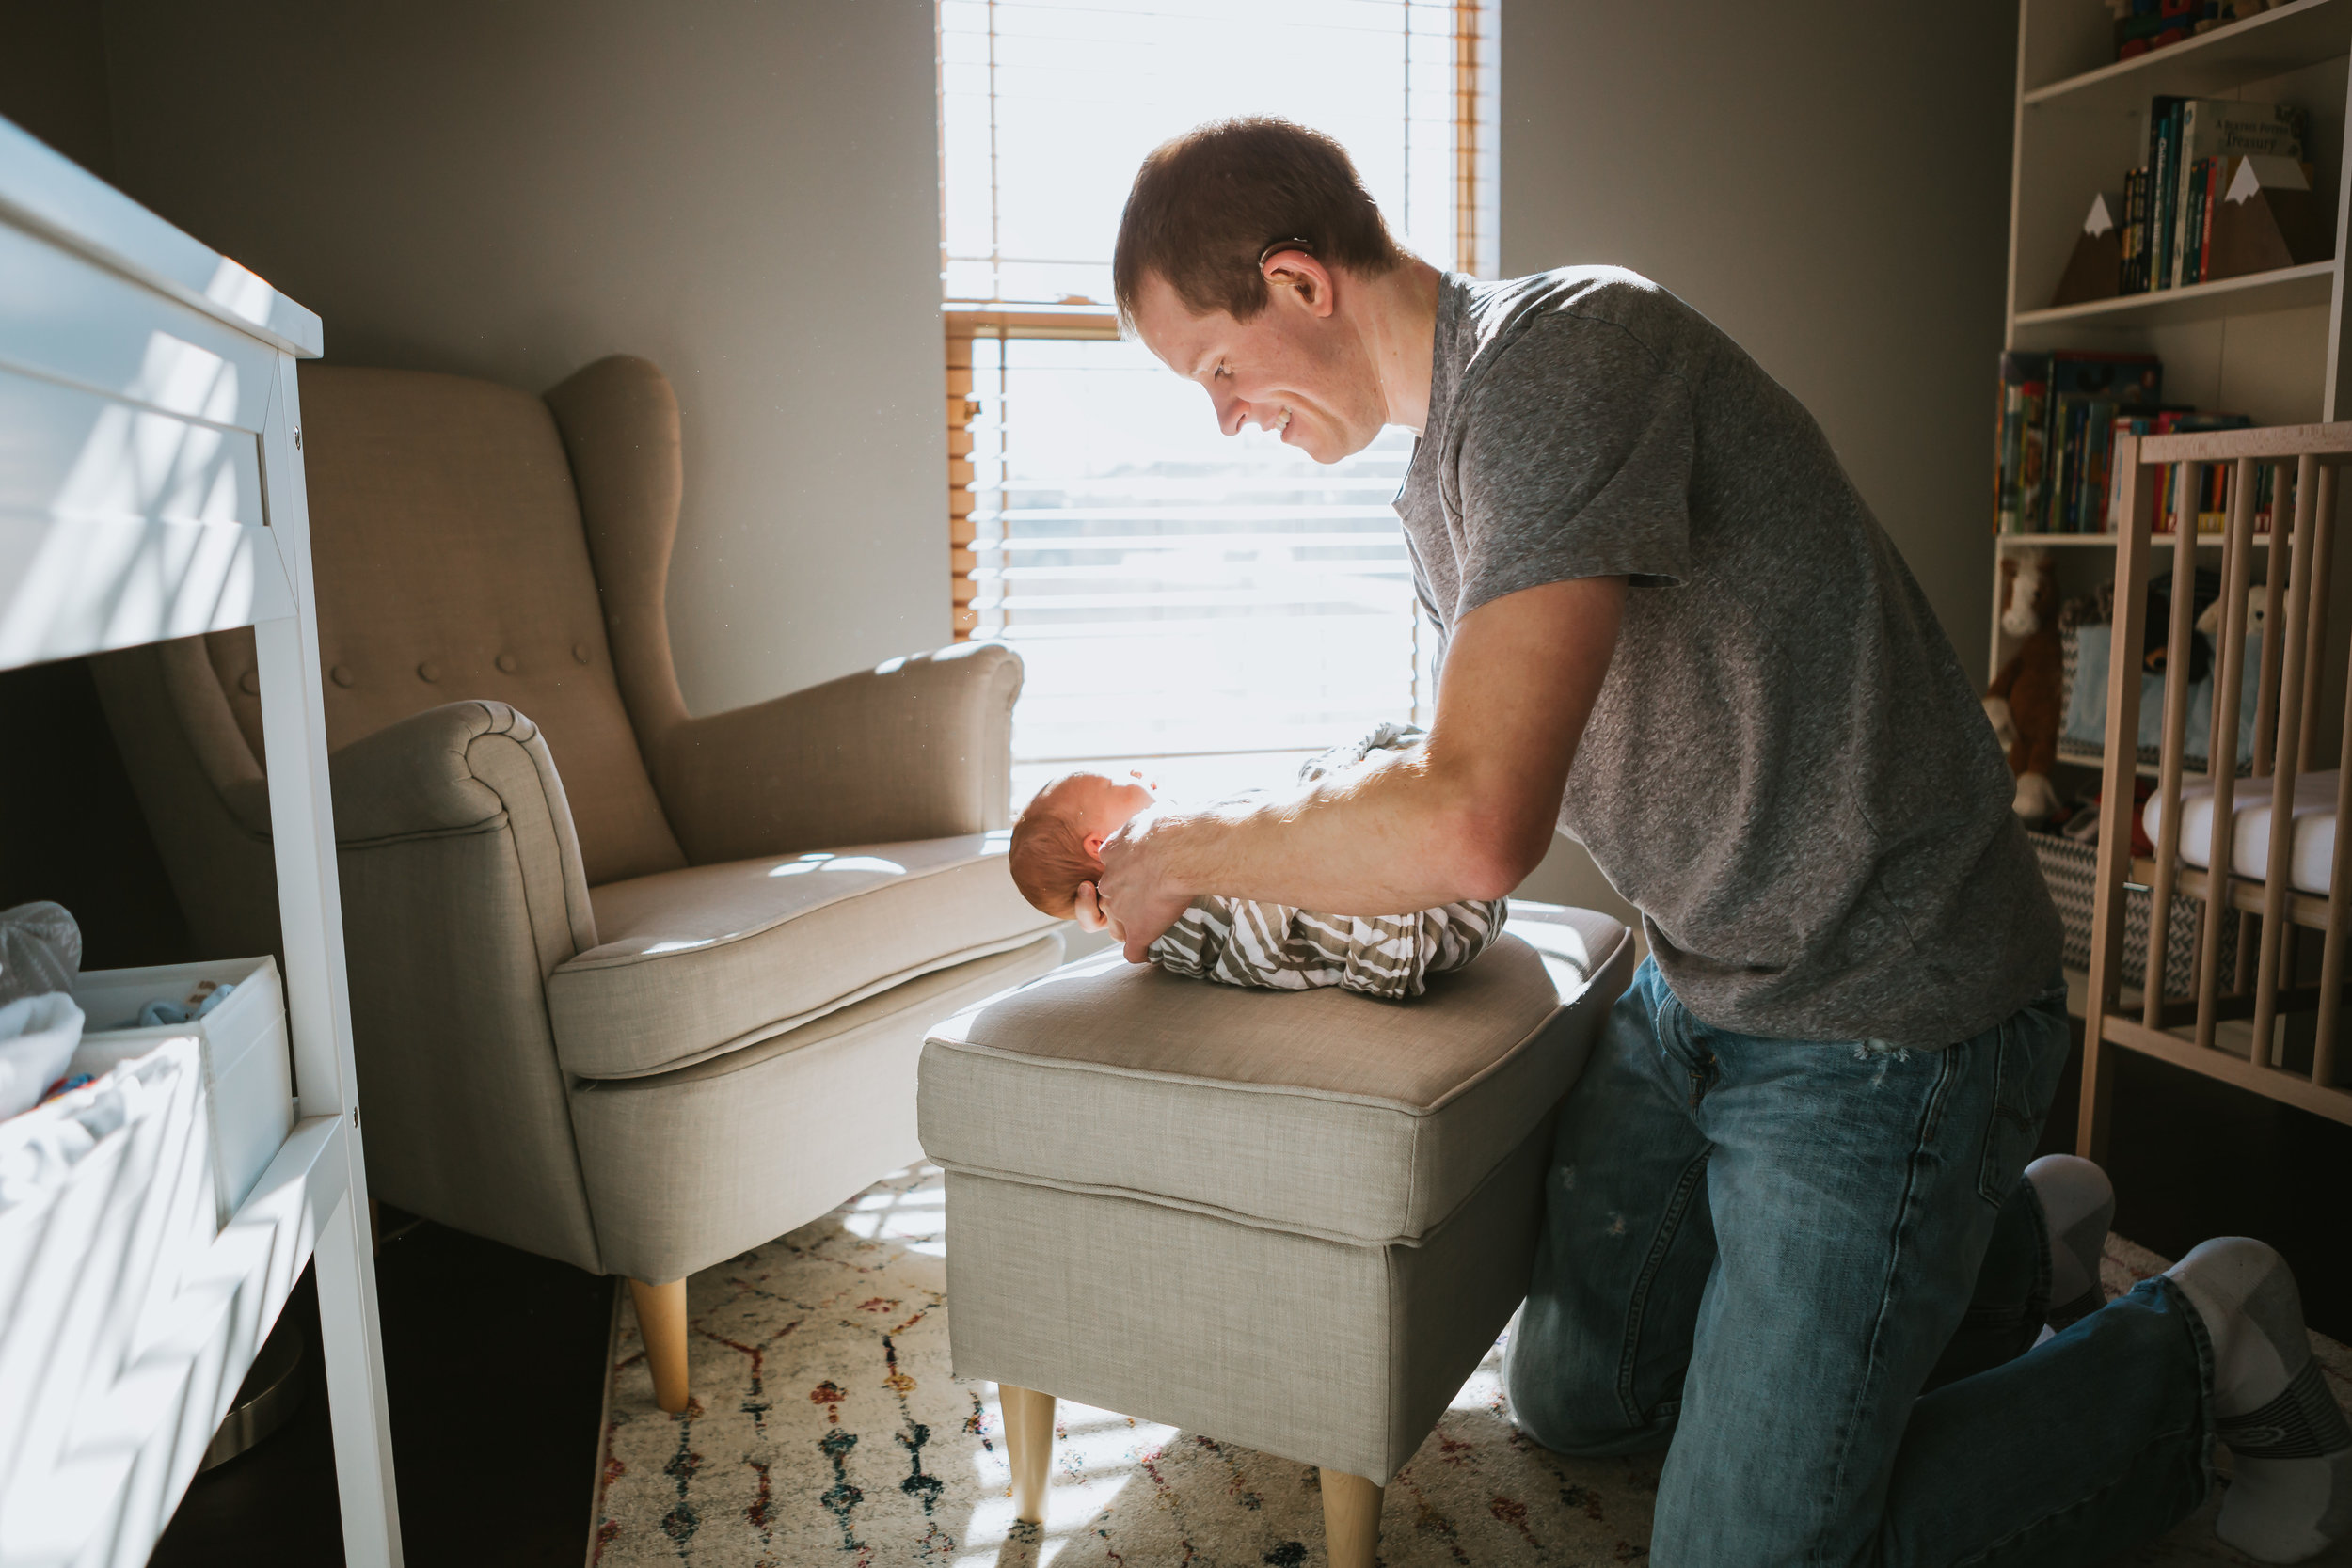  Dad caring for his new little guy in their nursery designed just for him #tealawardphotography #texasnewbornphotographysession #amarillophotographer #amarilloenewbornphotographer #emotionalphotography #lifestylephotography #inhomesession #lifestyles #newbaby #newfamilyofthree #sweetbaby #nurseryphotos 